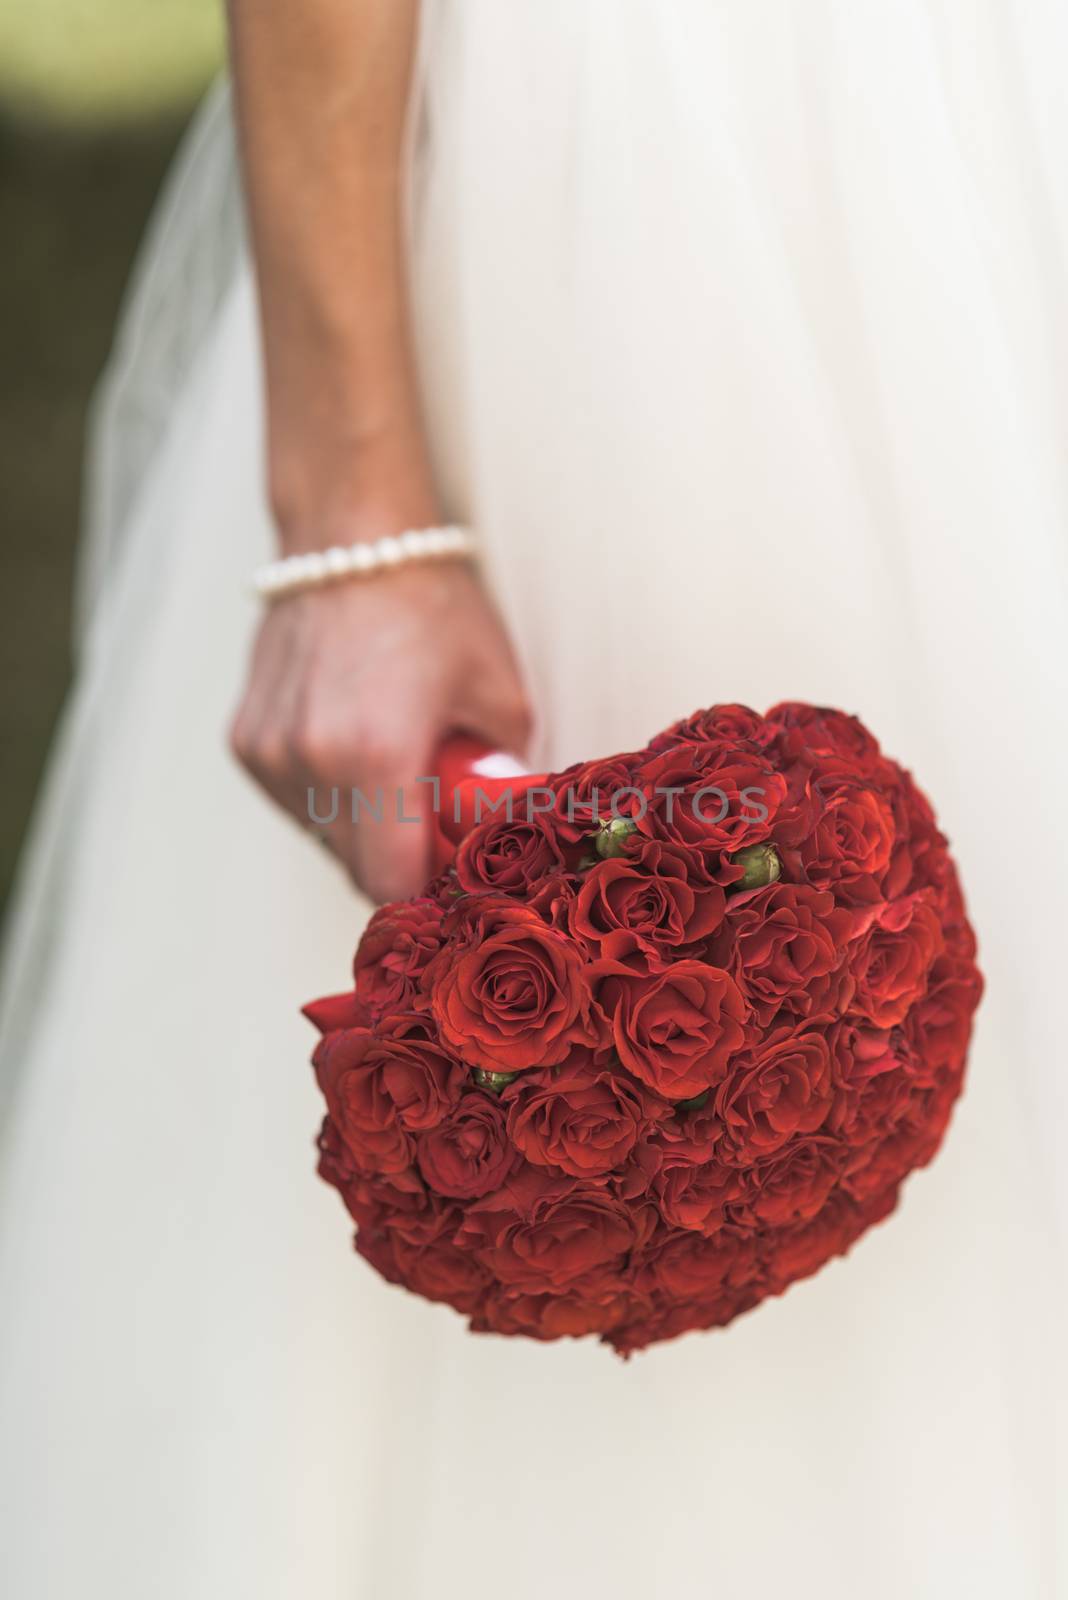 the bride's bouquet of red roses in the hand of the bride, white dress